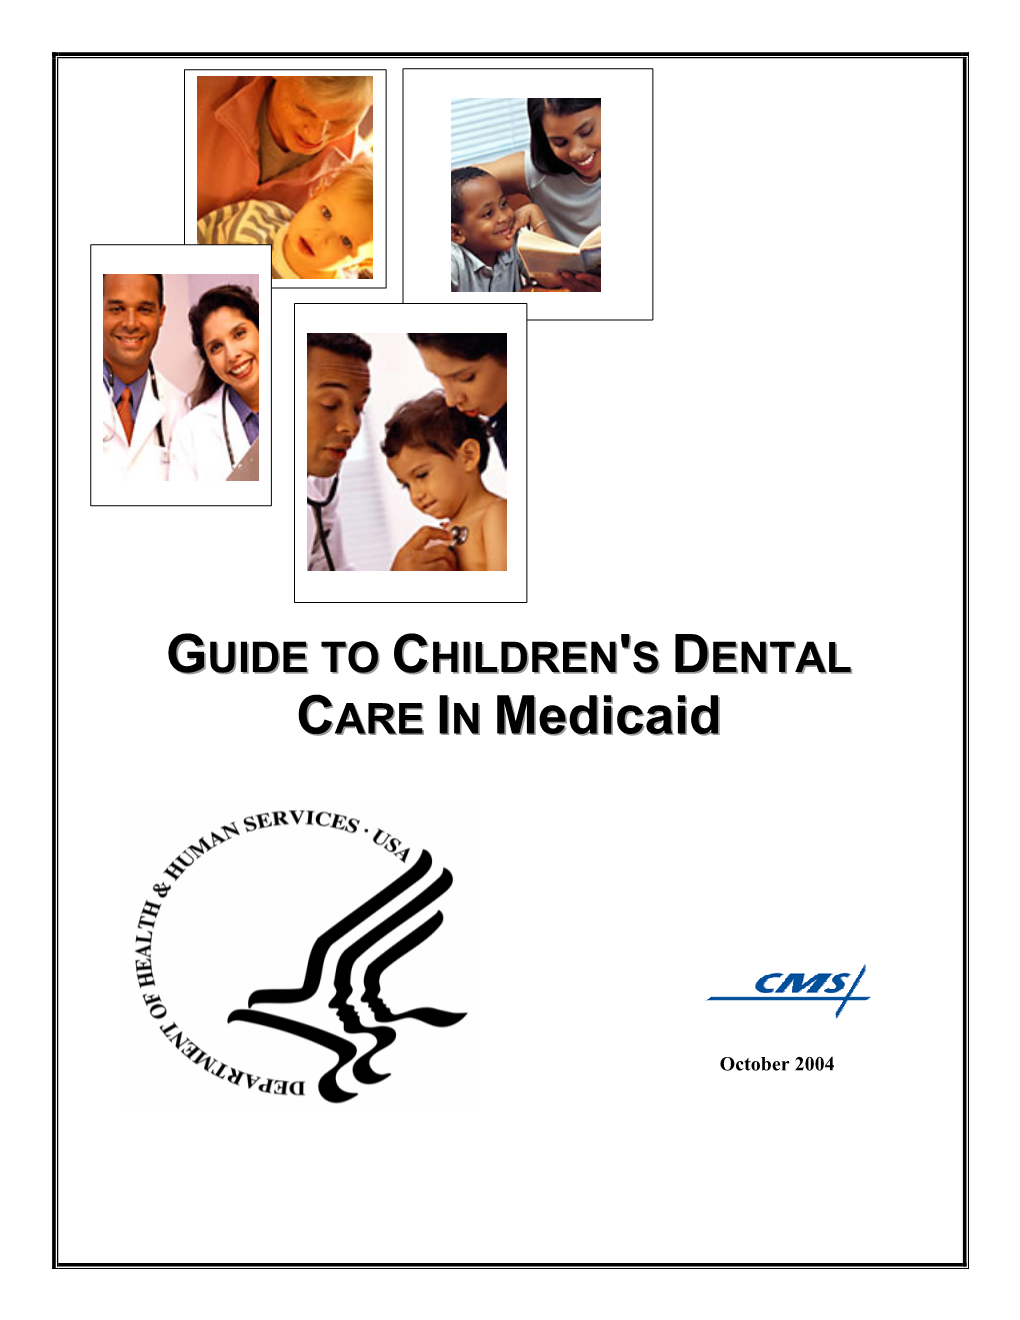 GUIDE to CHILDREN's DENTAL CARE in Medicaid